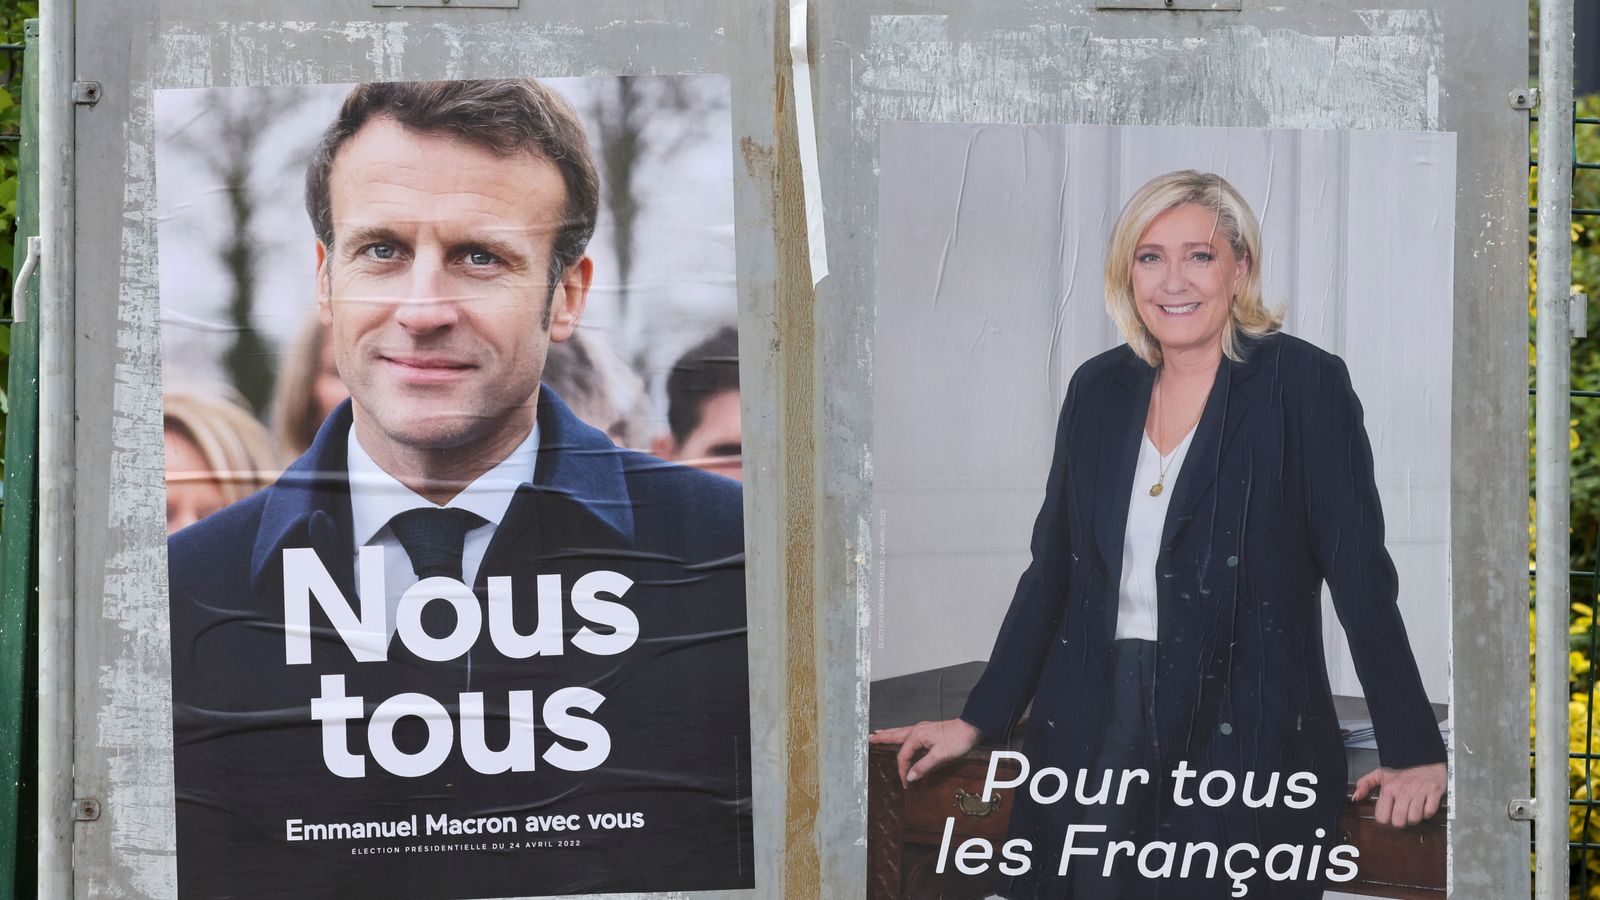 French election: Macron is taking a huge gamble - what happens if it doesn't pay off?